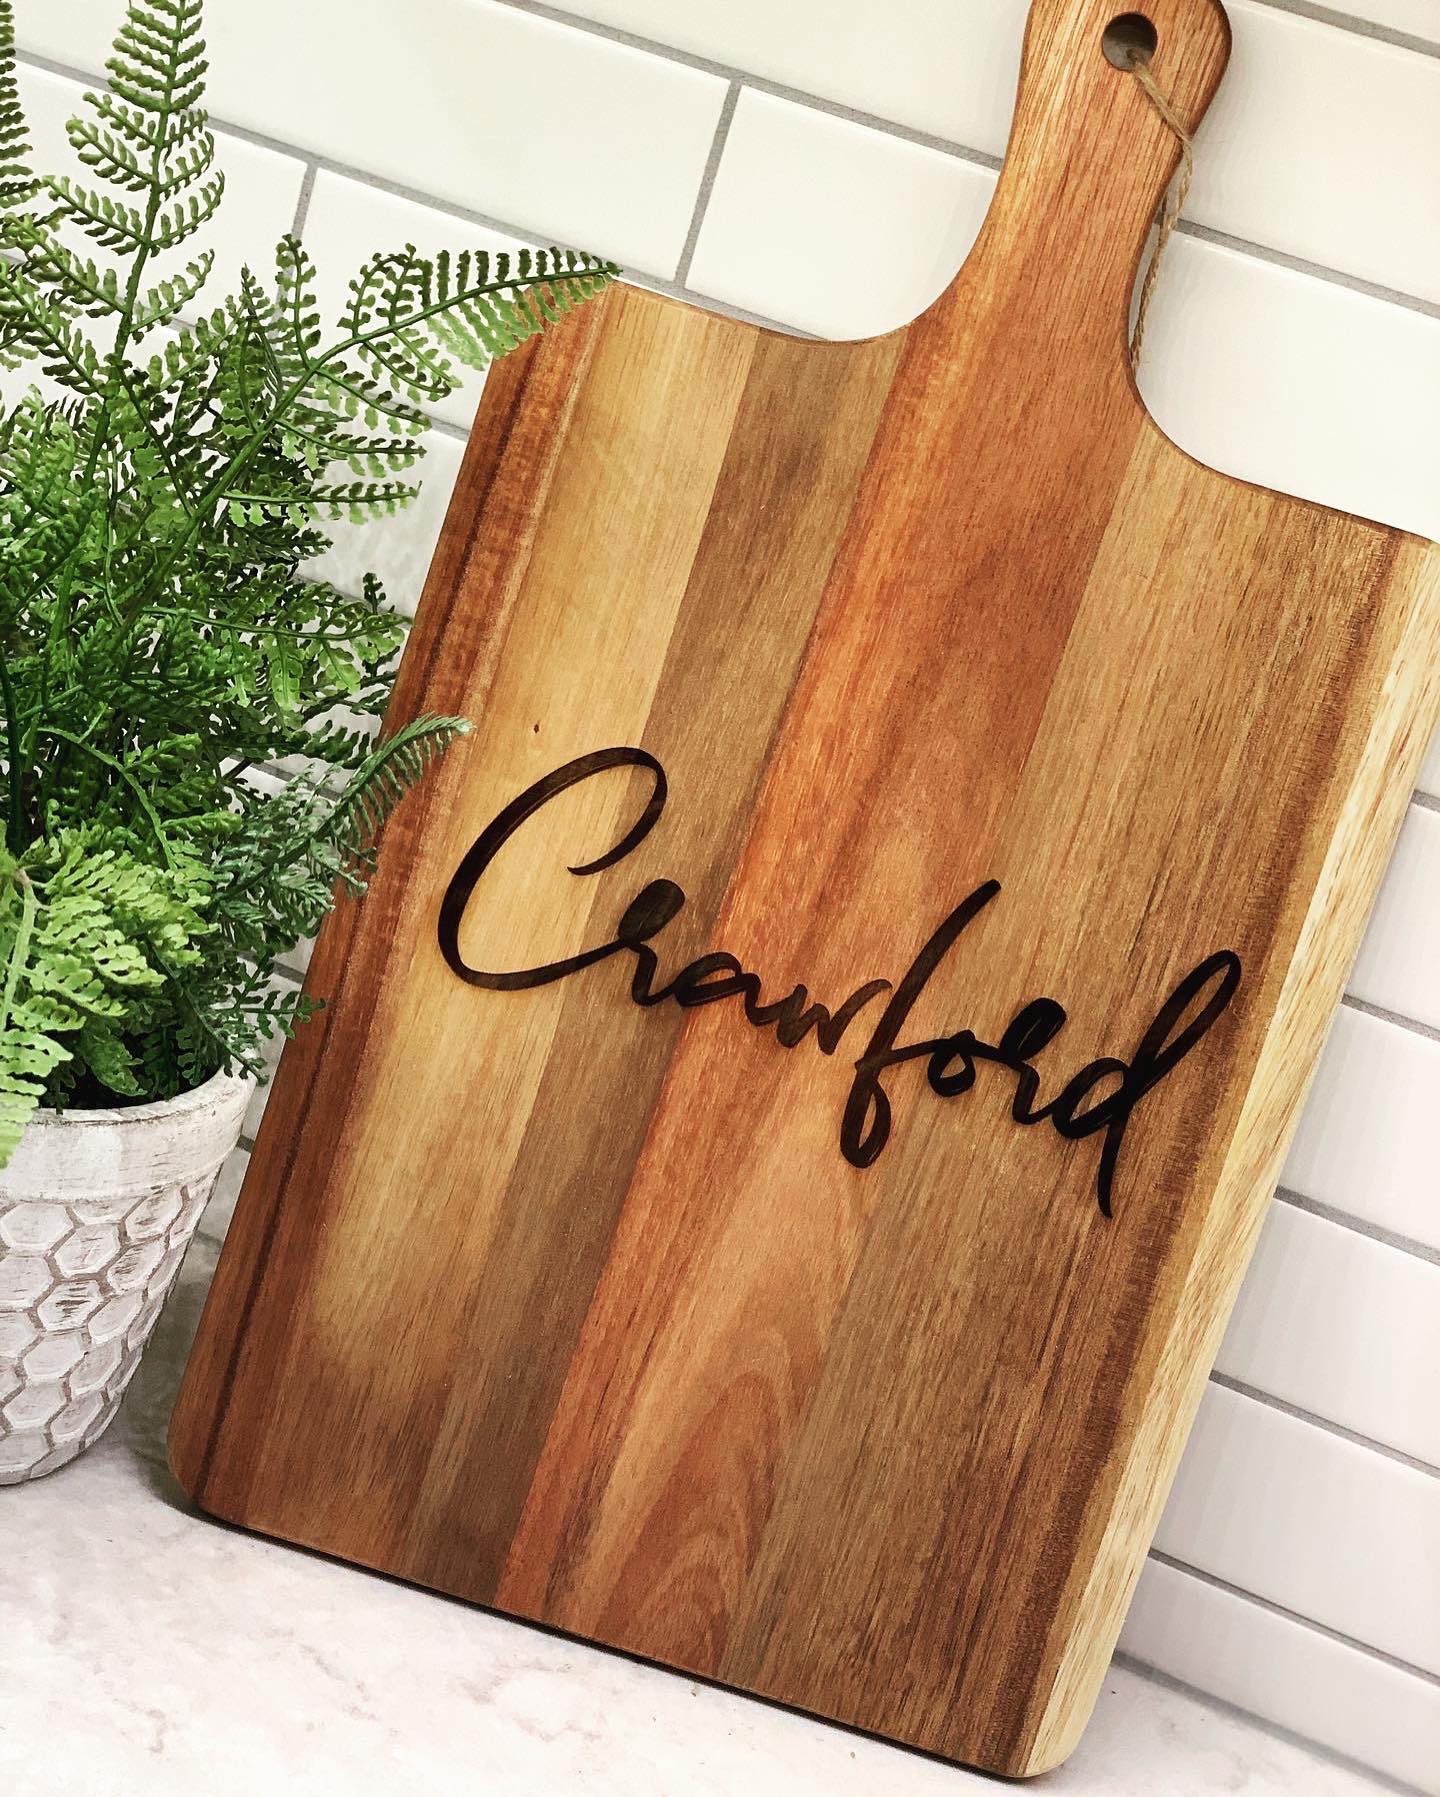 PYD Life Marble Wood Cheese Cutting Board 5.9 x 9.8 Square for xTool Laser Engraving Custom Designs Cake Fruits Vegetables Bread Serving Board for